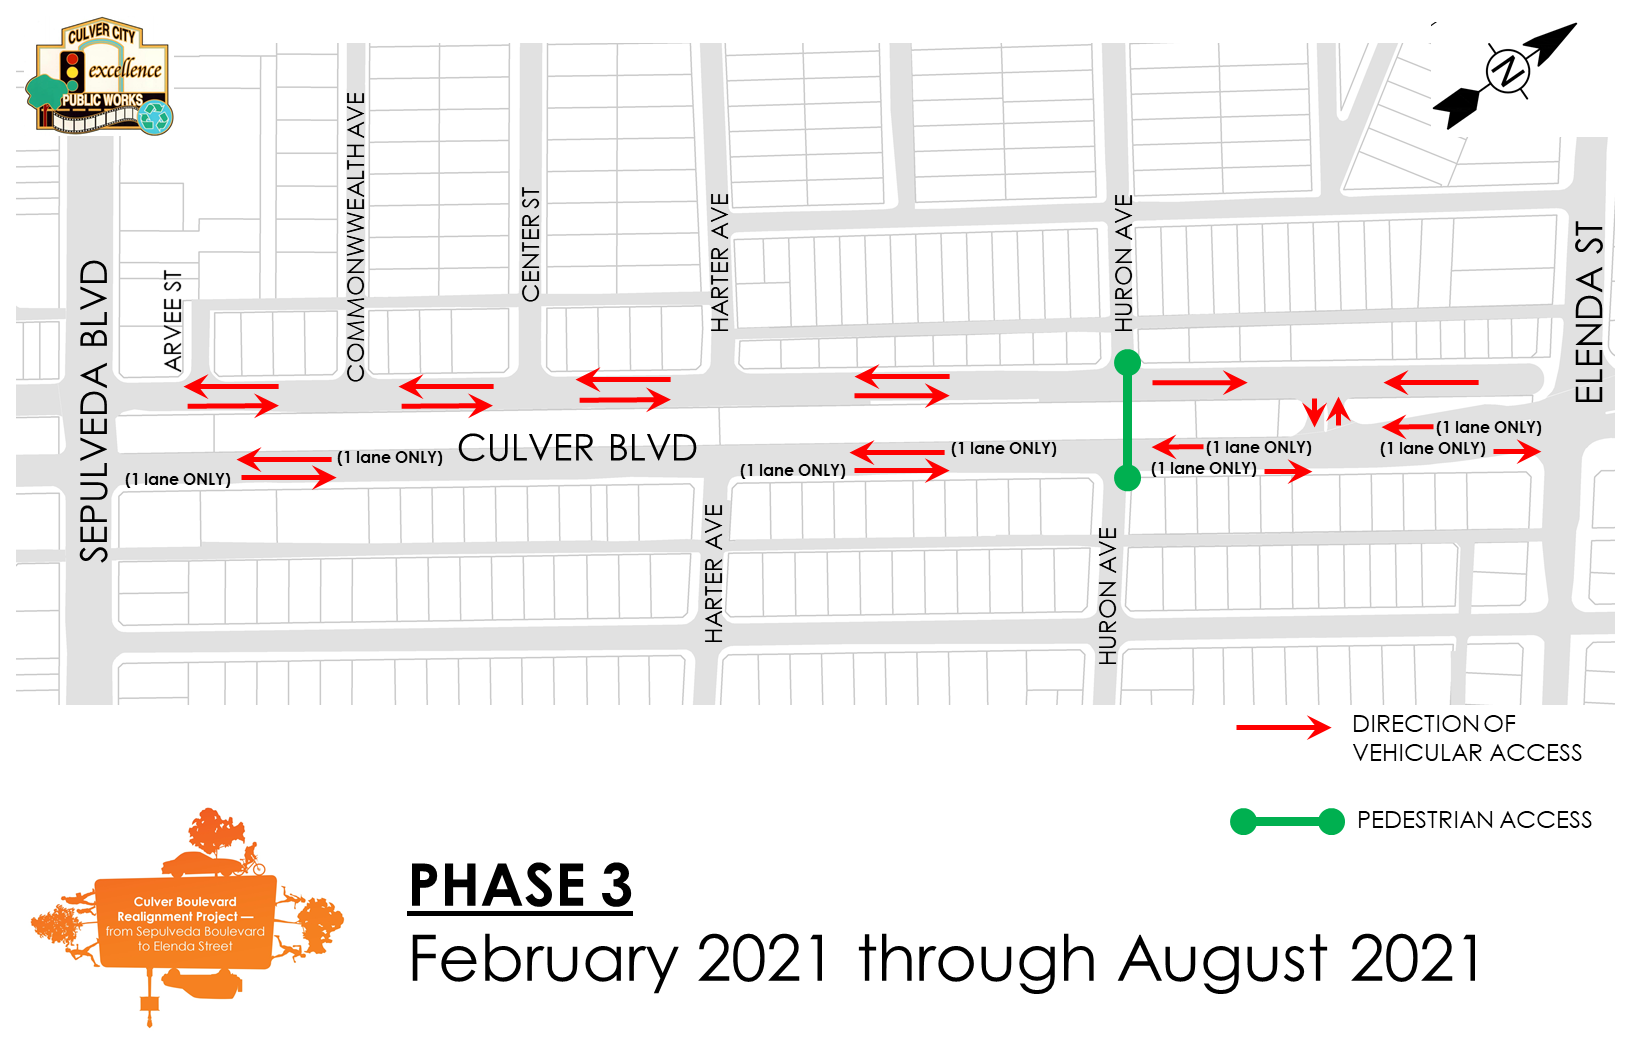 Phase 3 February 2021 through August 2021 traffic map